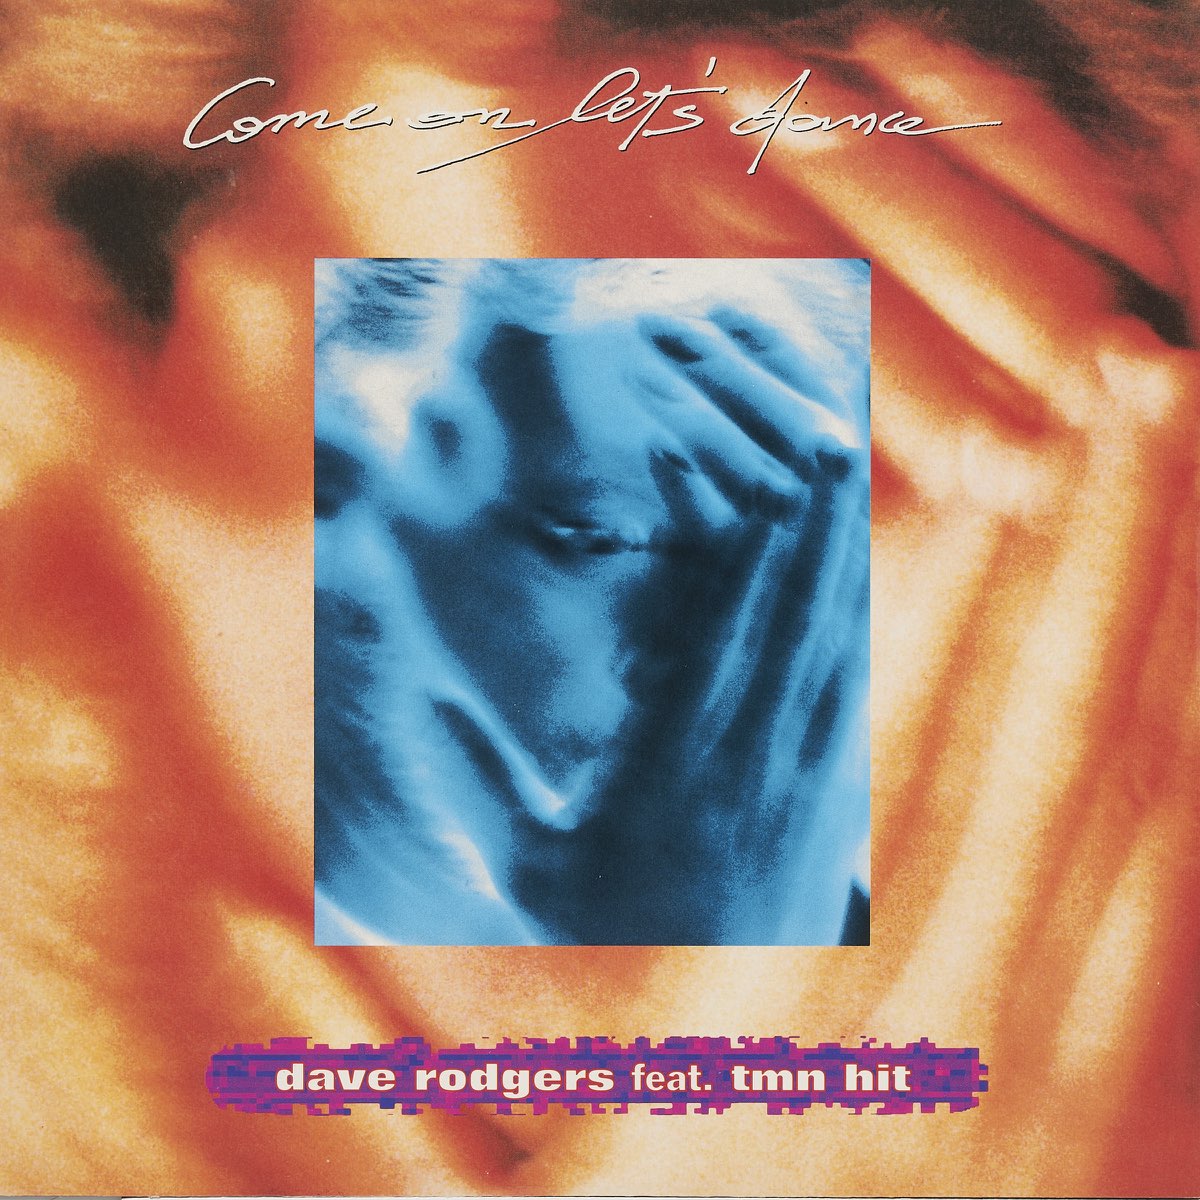 Dave rodgers deja vu. Dave Rodgers featuring tmn's Hit – get Wild.